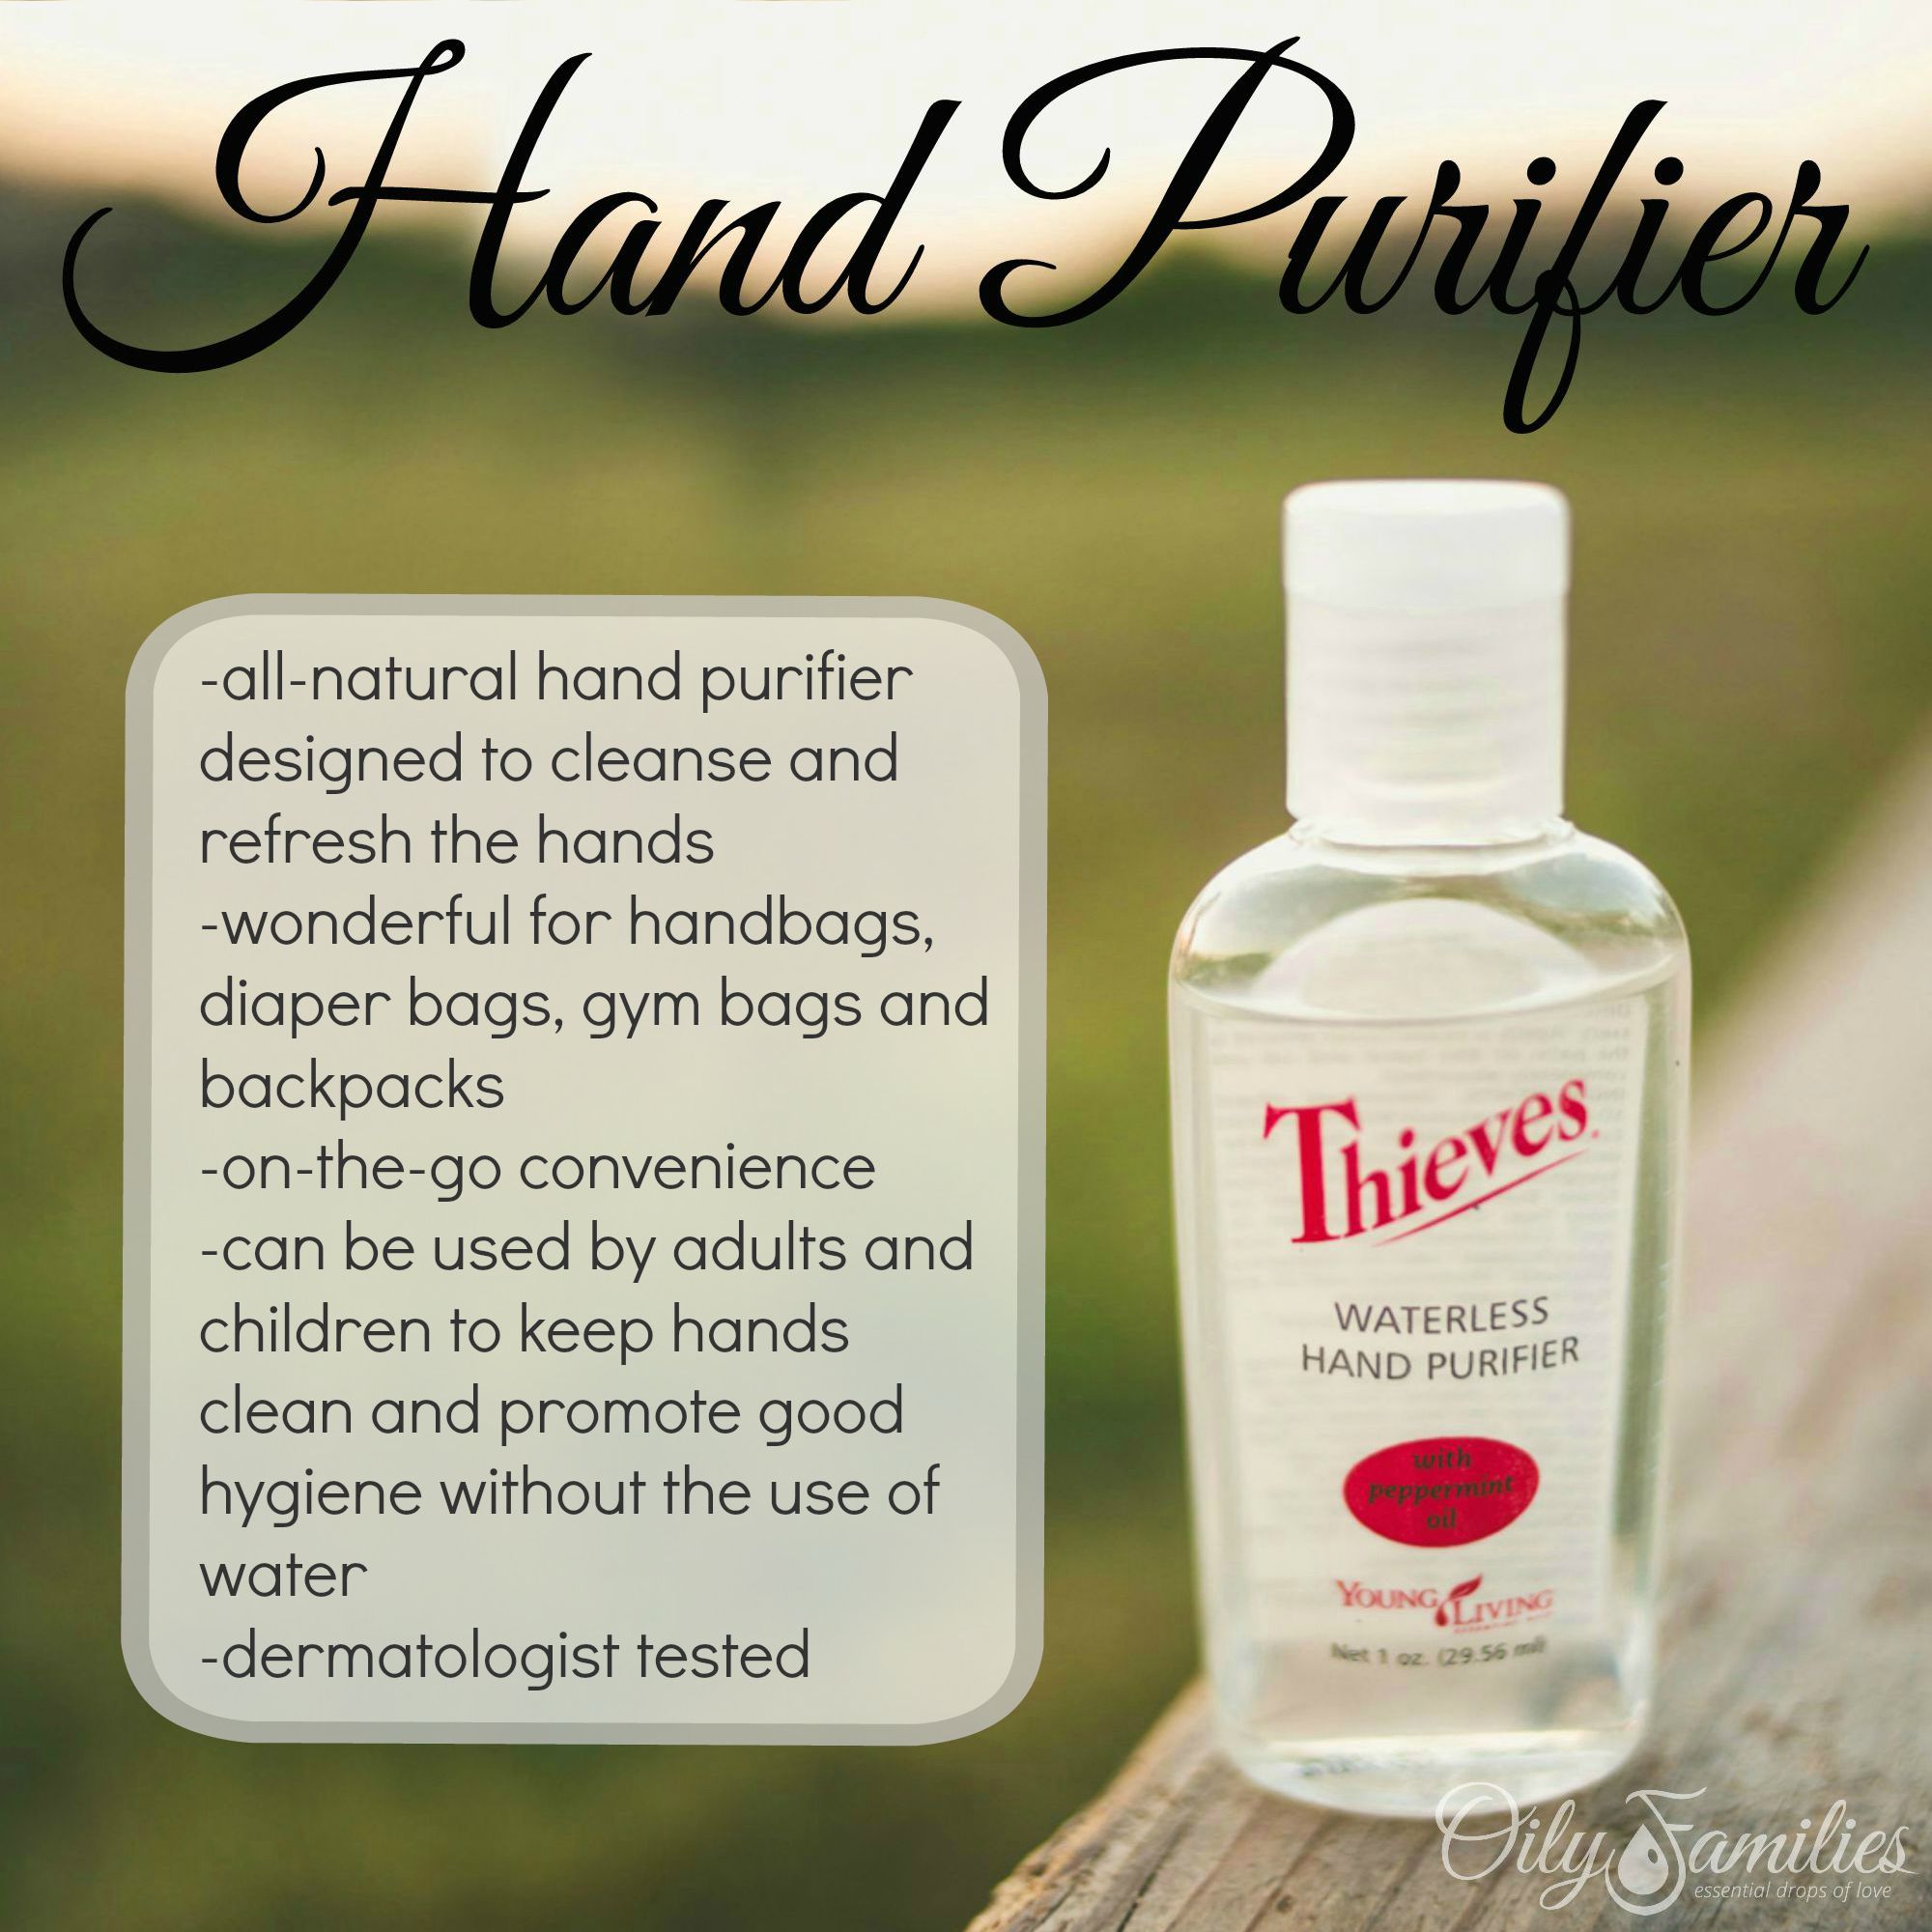 Thieves Hand Purifier - A Non-Toxic Way to Keep Hands Clean